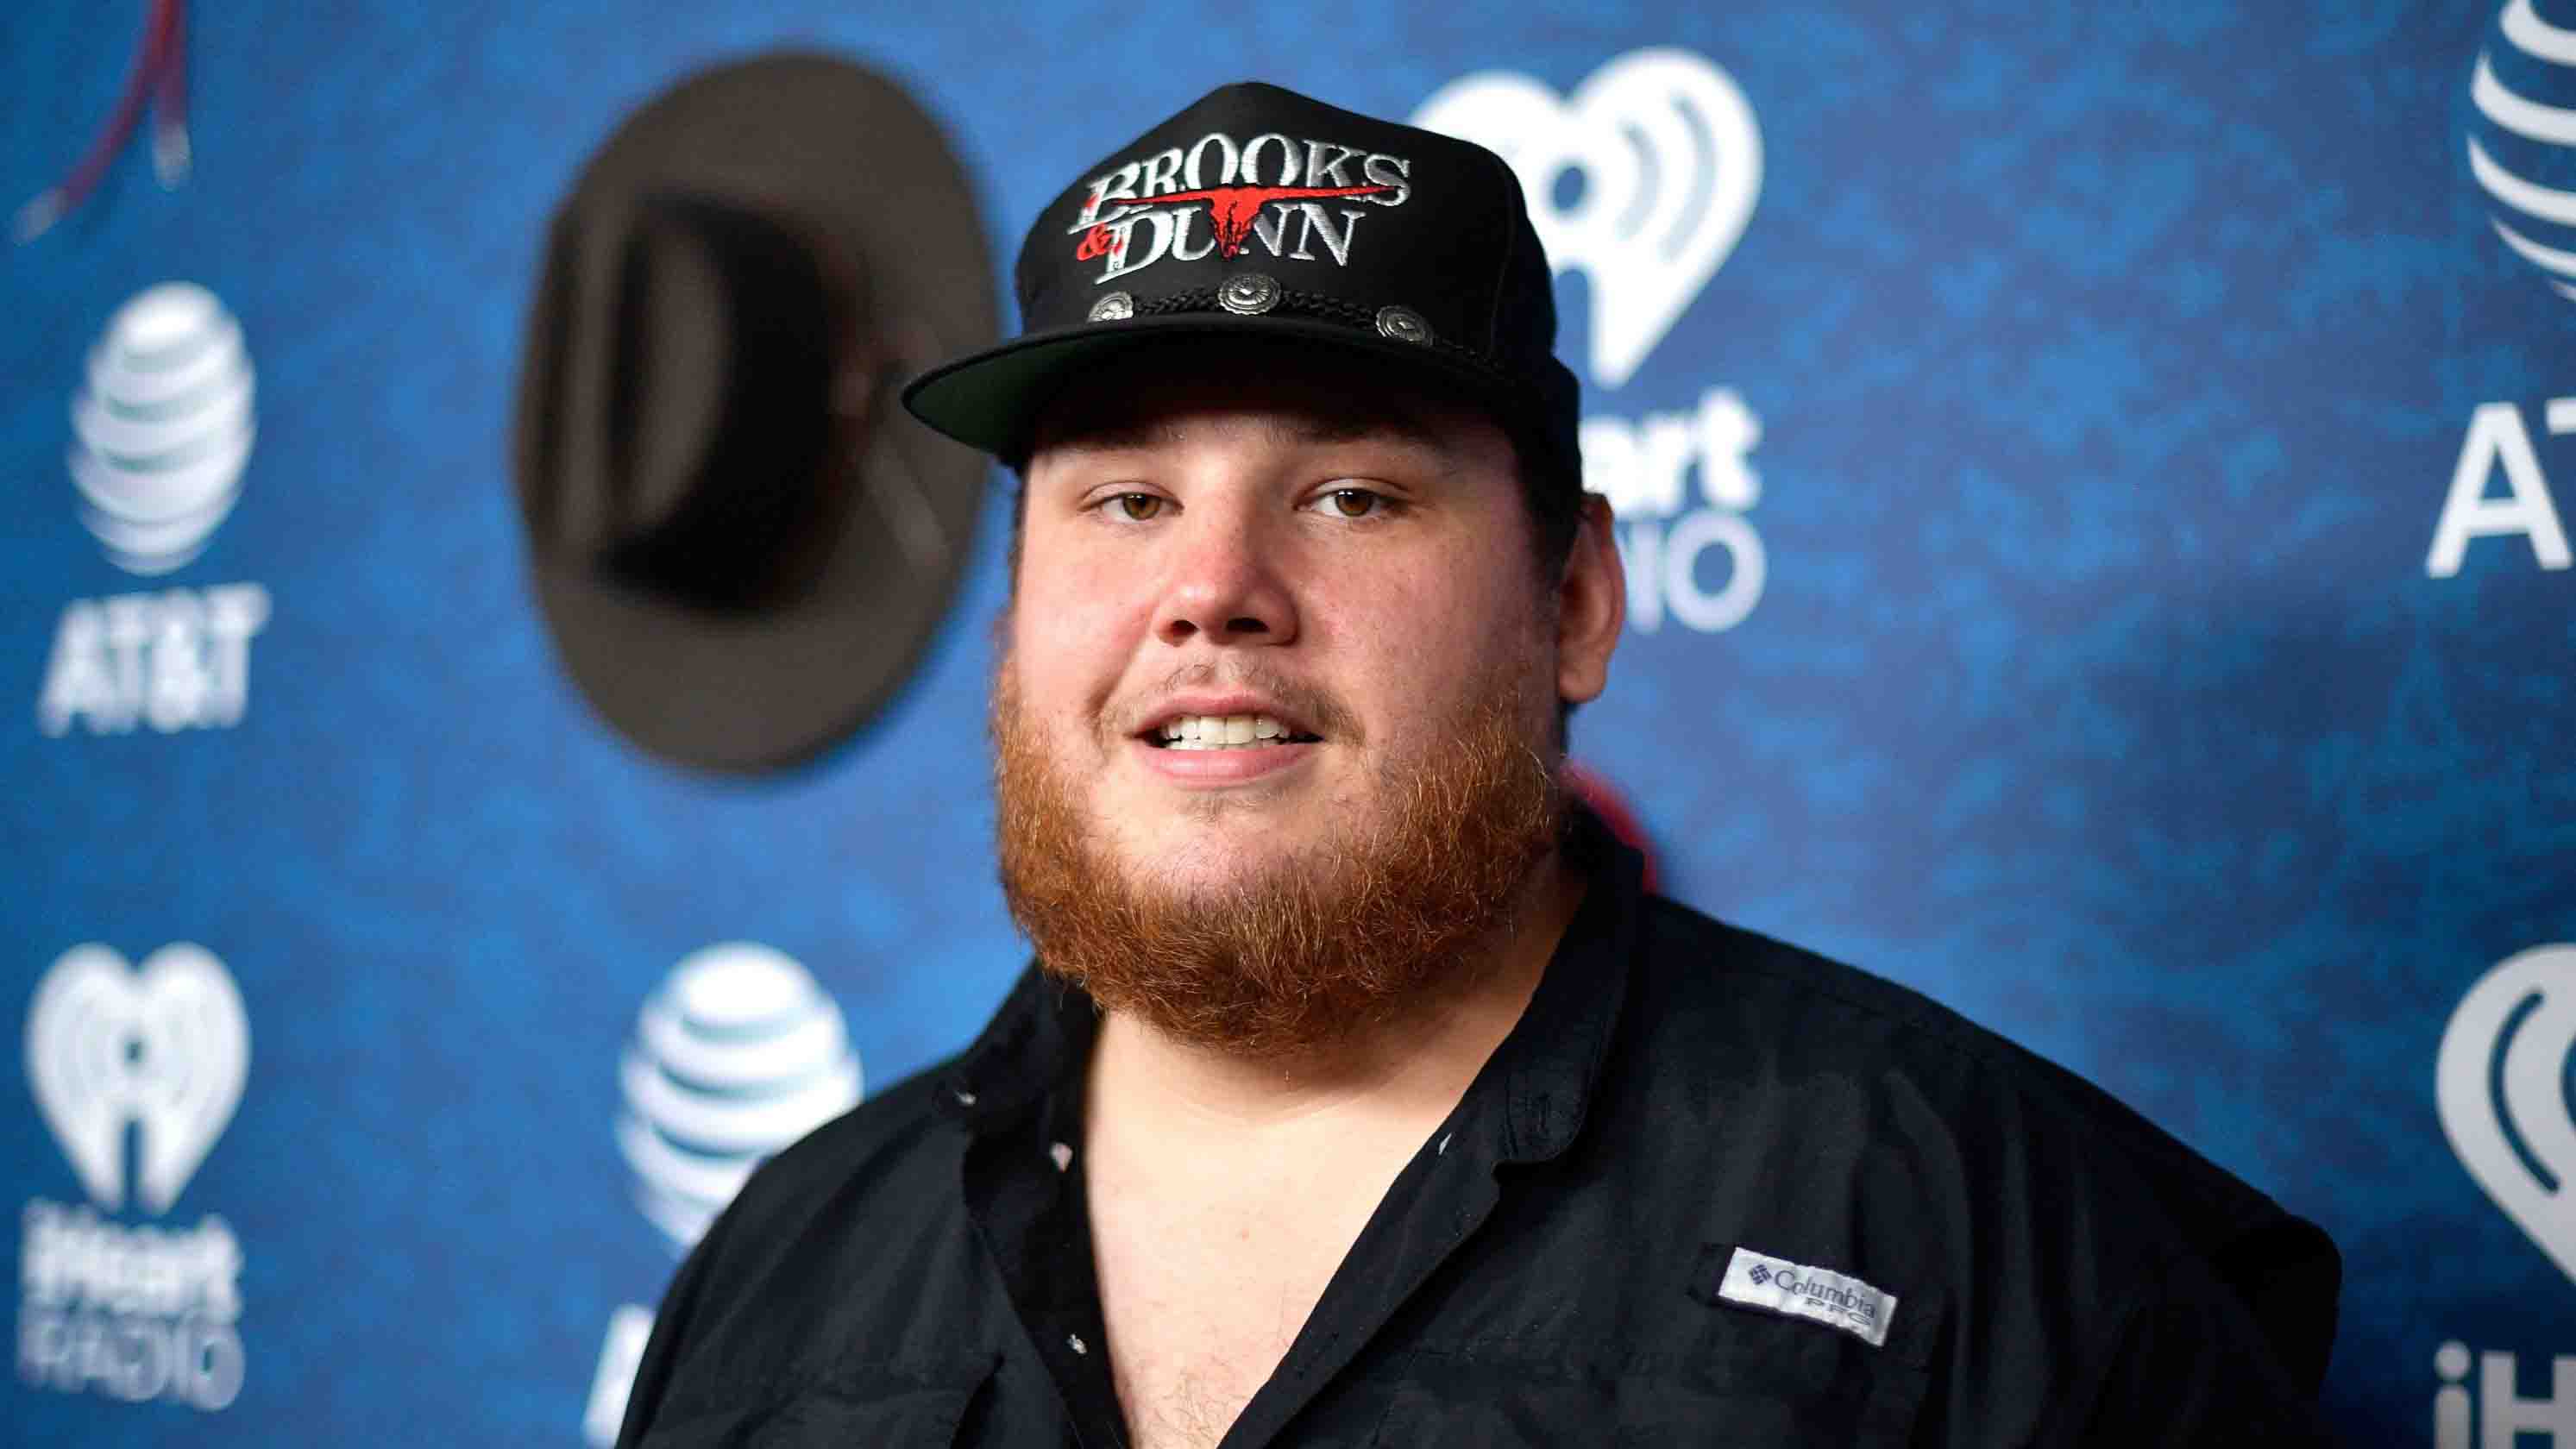 Luke Albert Combs (born March 2, 1990) is an American country music singer and songwriter. Combs has released one album for Columbia Nashville, which ...